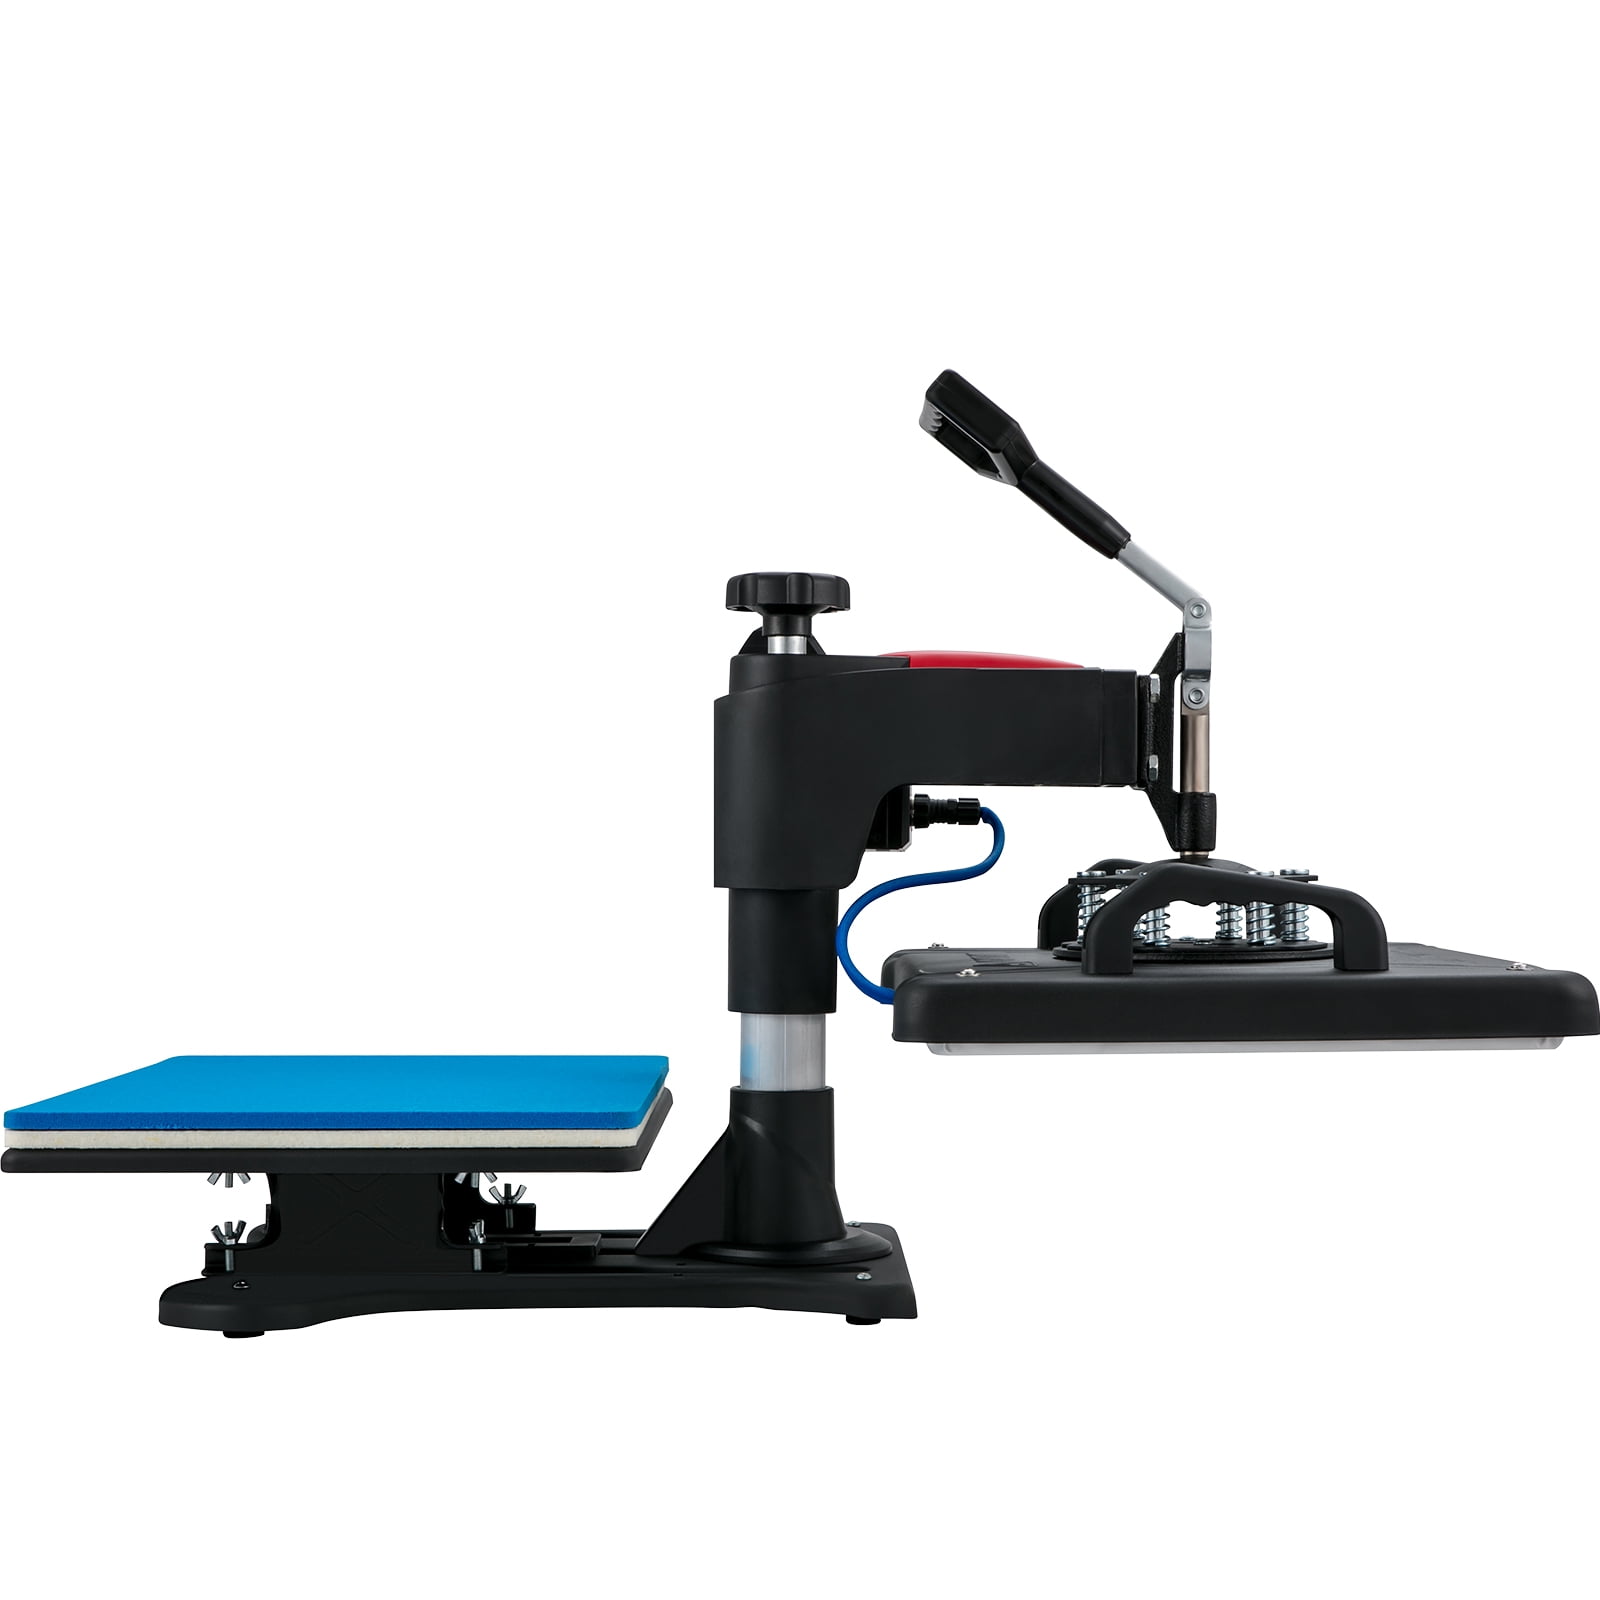 BENTISM Hat Heat Press Machine for Caps 5.5 X 3.5, Cap Heat Press for  Stuctured Hats and Sublimation Projects, Heat Transfer Printing with  Digital LCD Timer & Temperature Control 